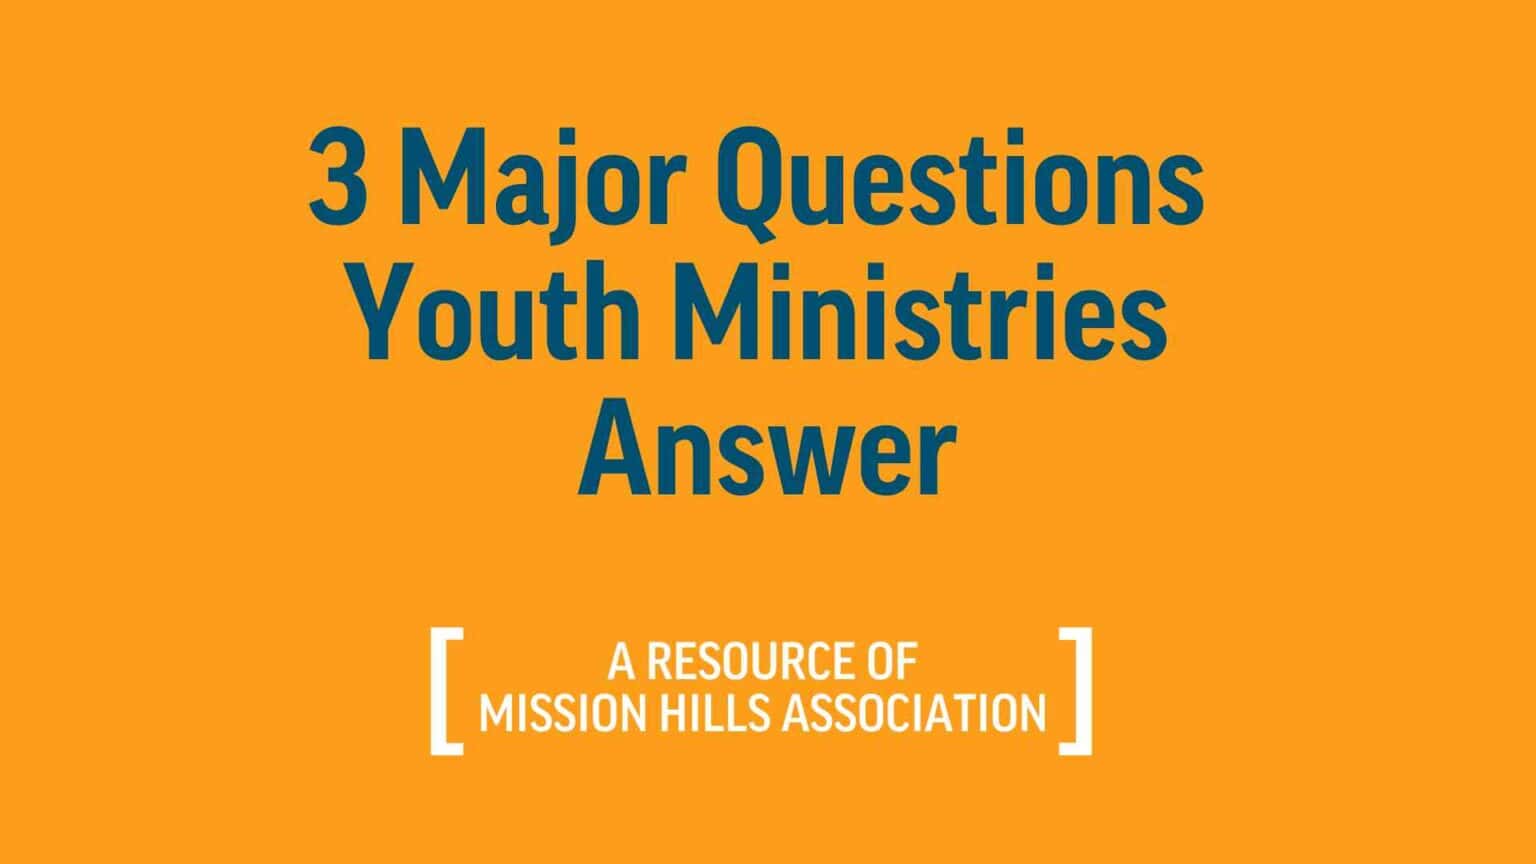 3 Major Questions Youth Ministries Answer